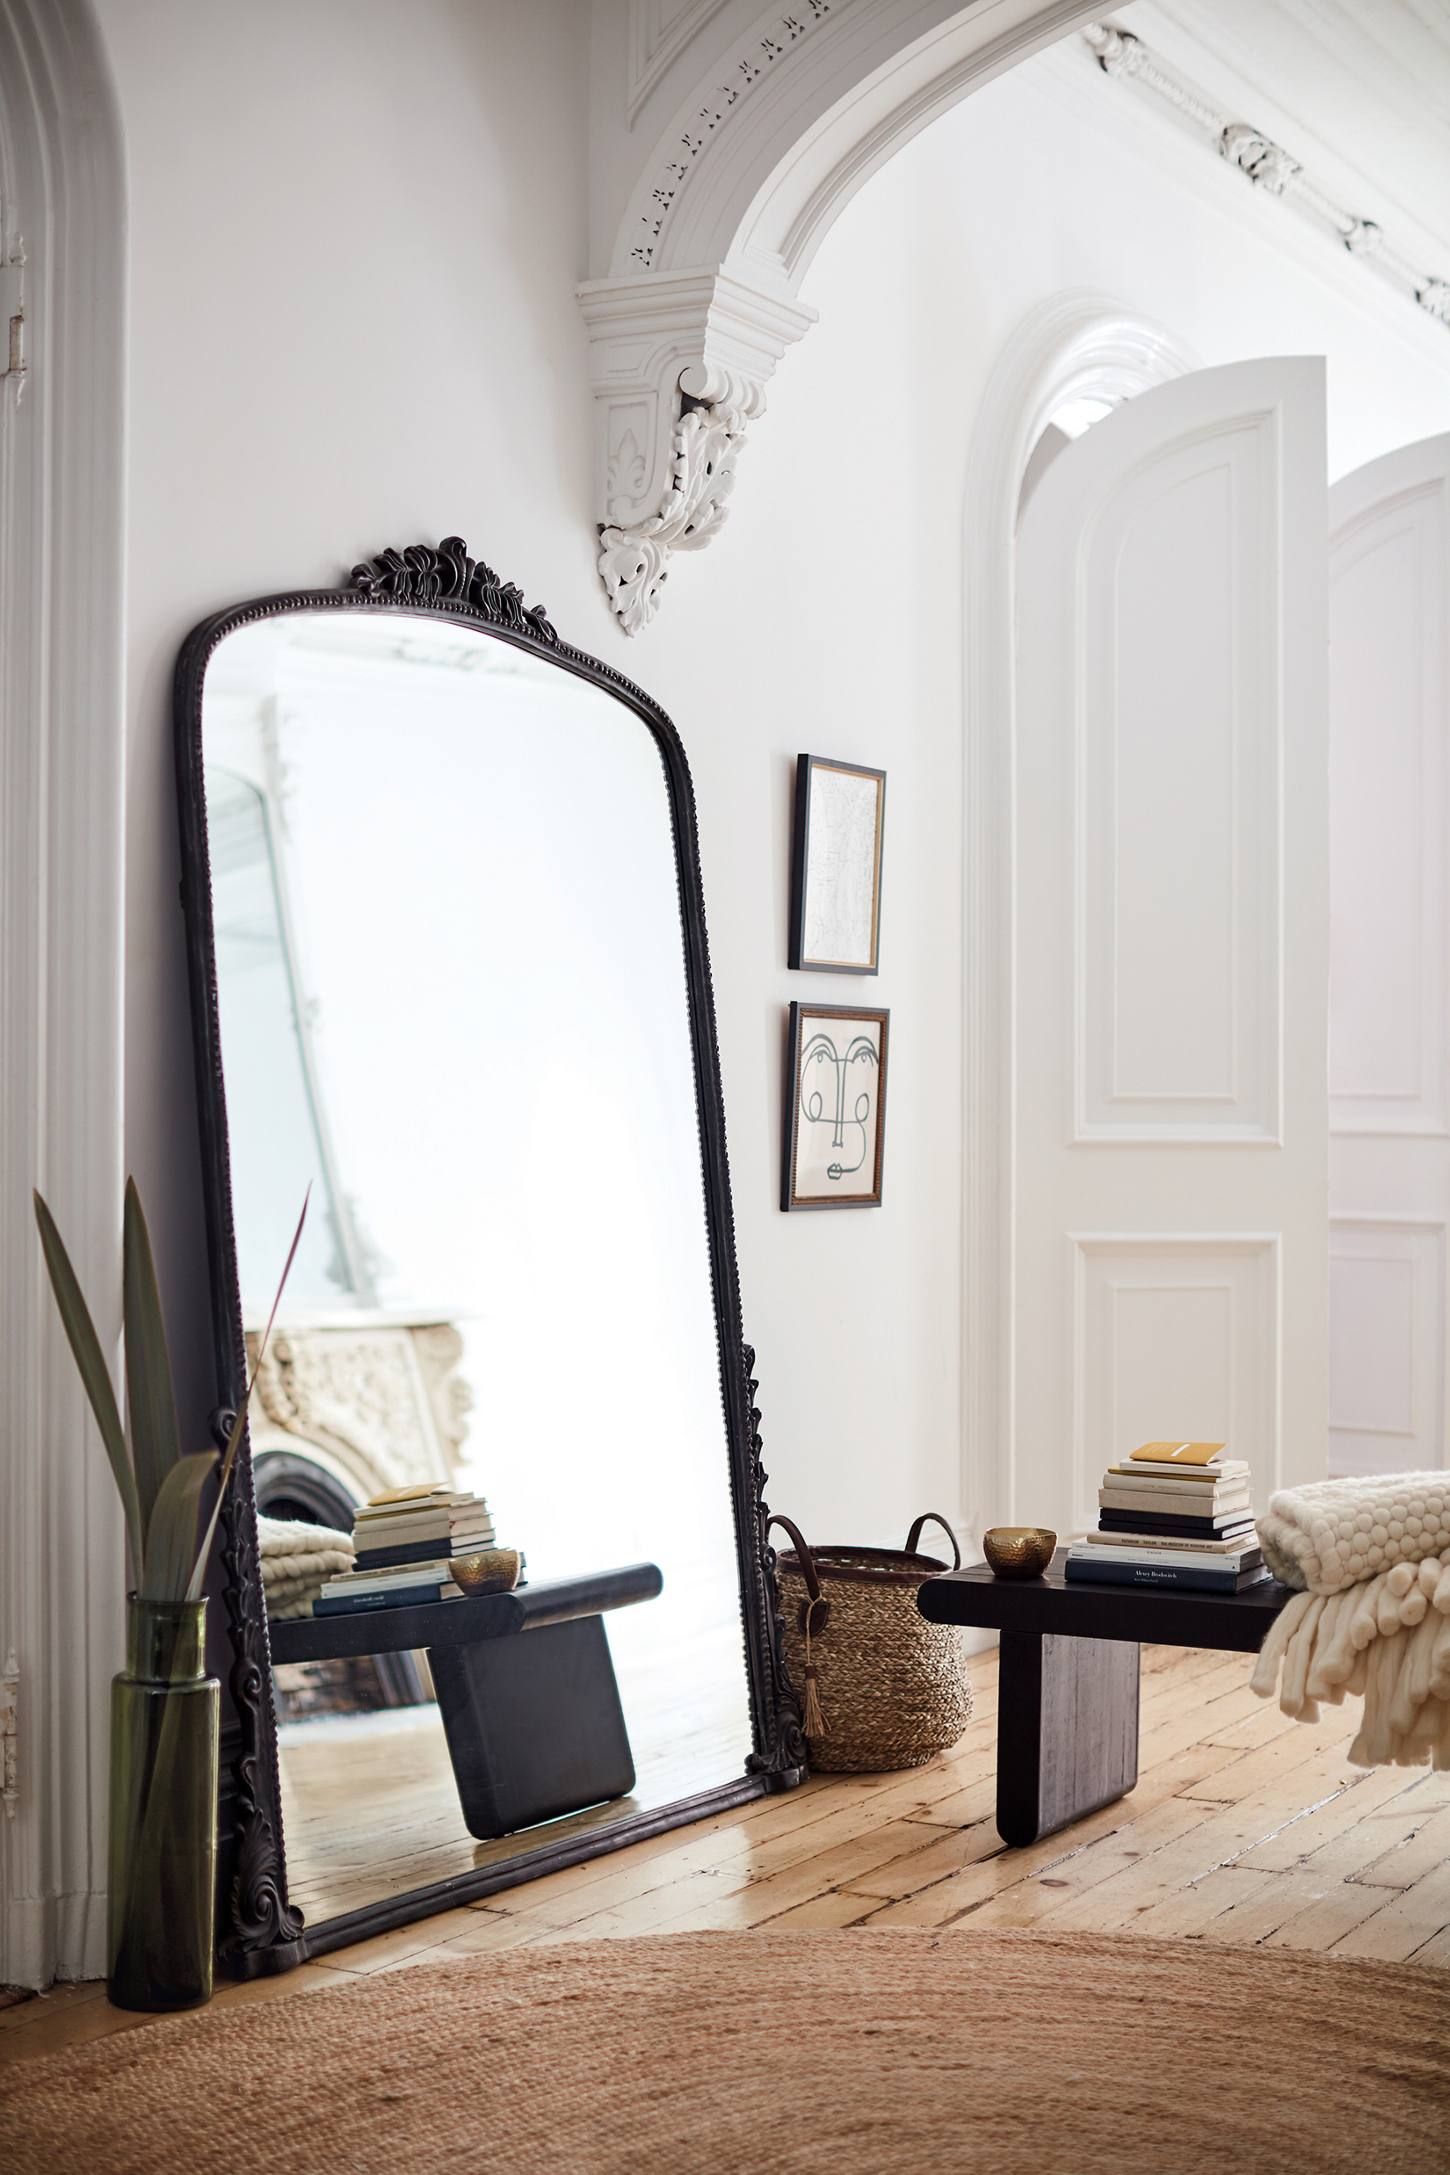 Use Mirrors to Create a Spacious Atmosphere